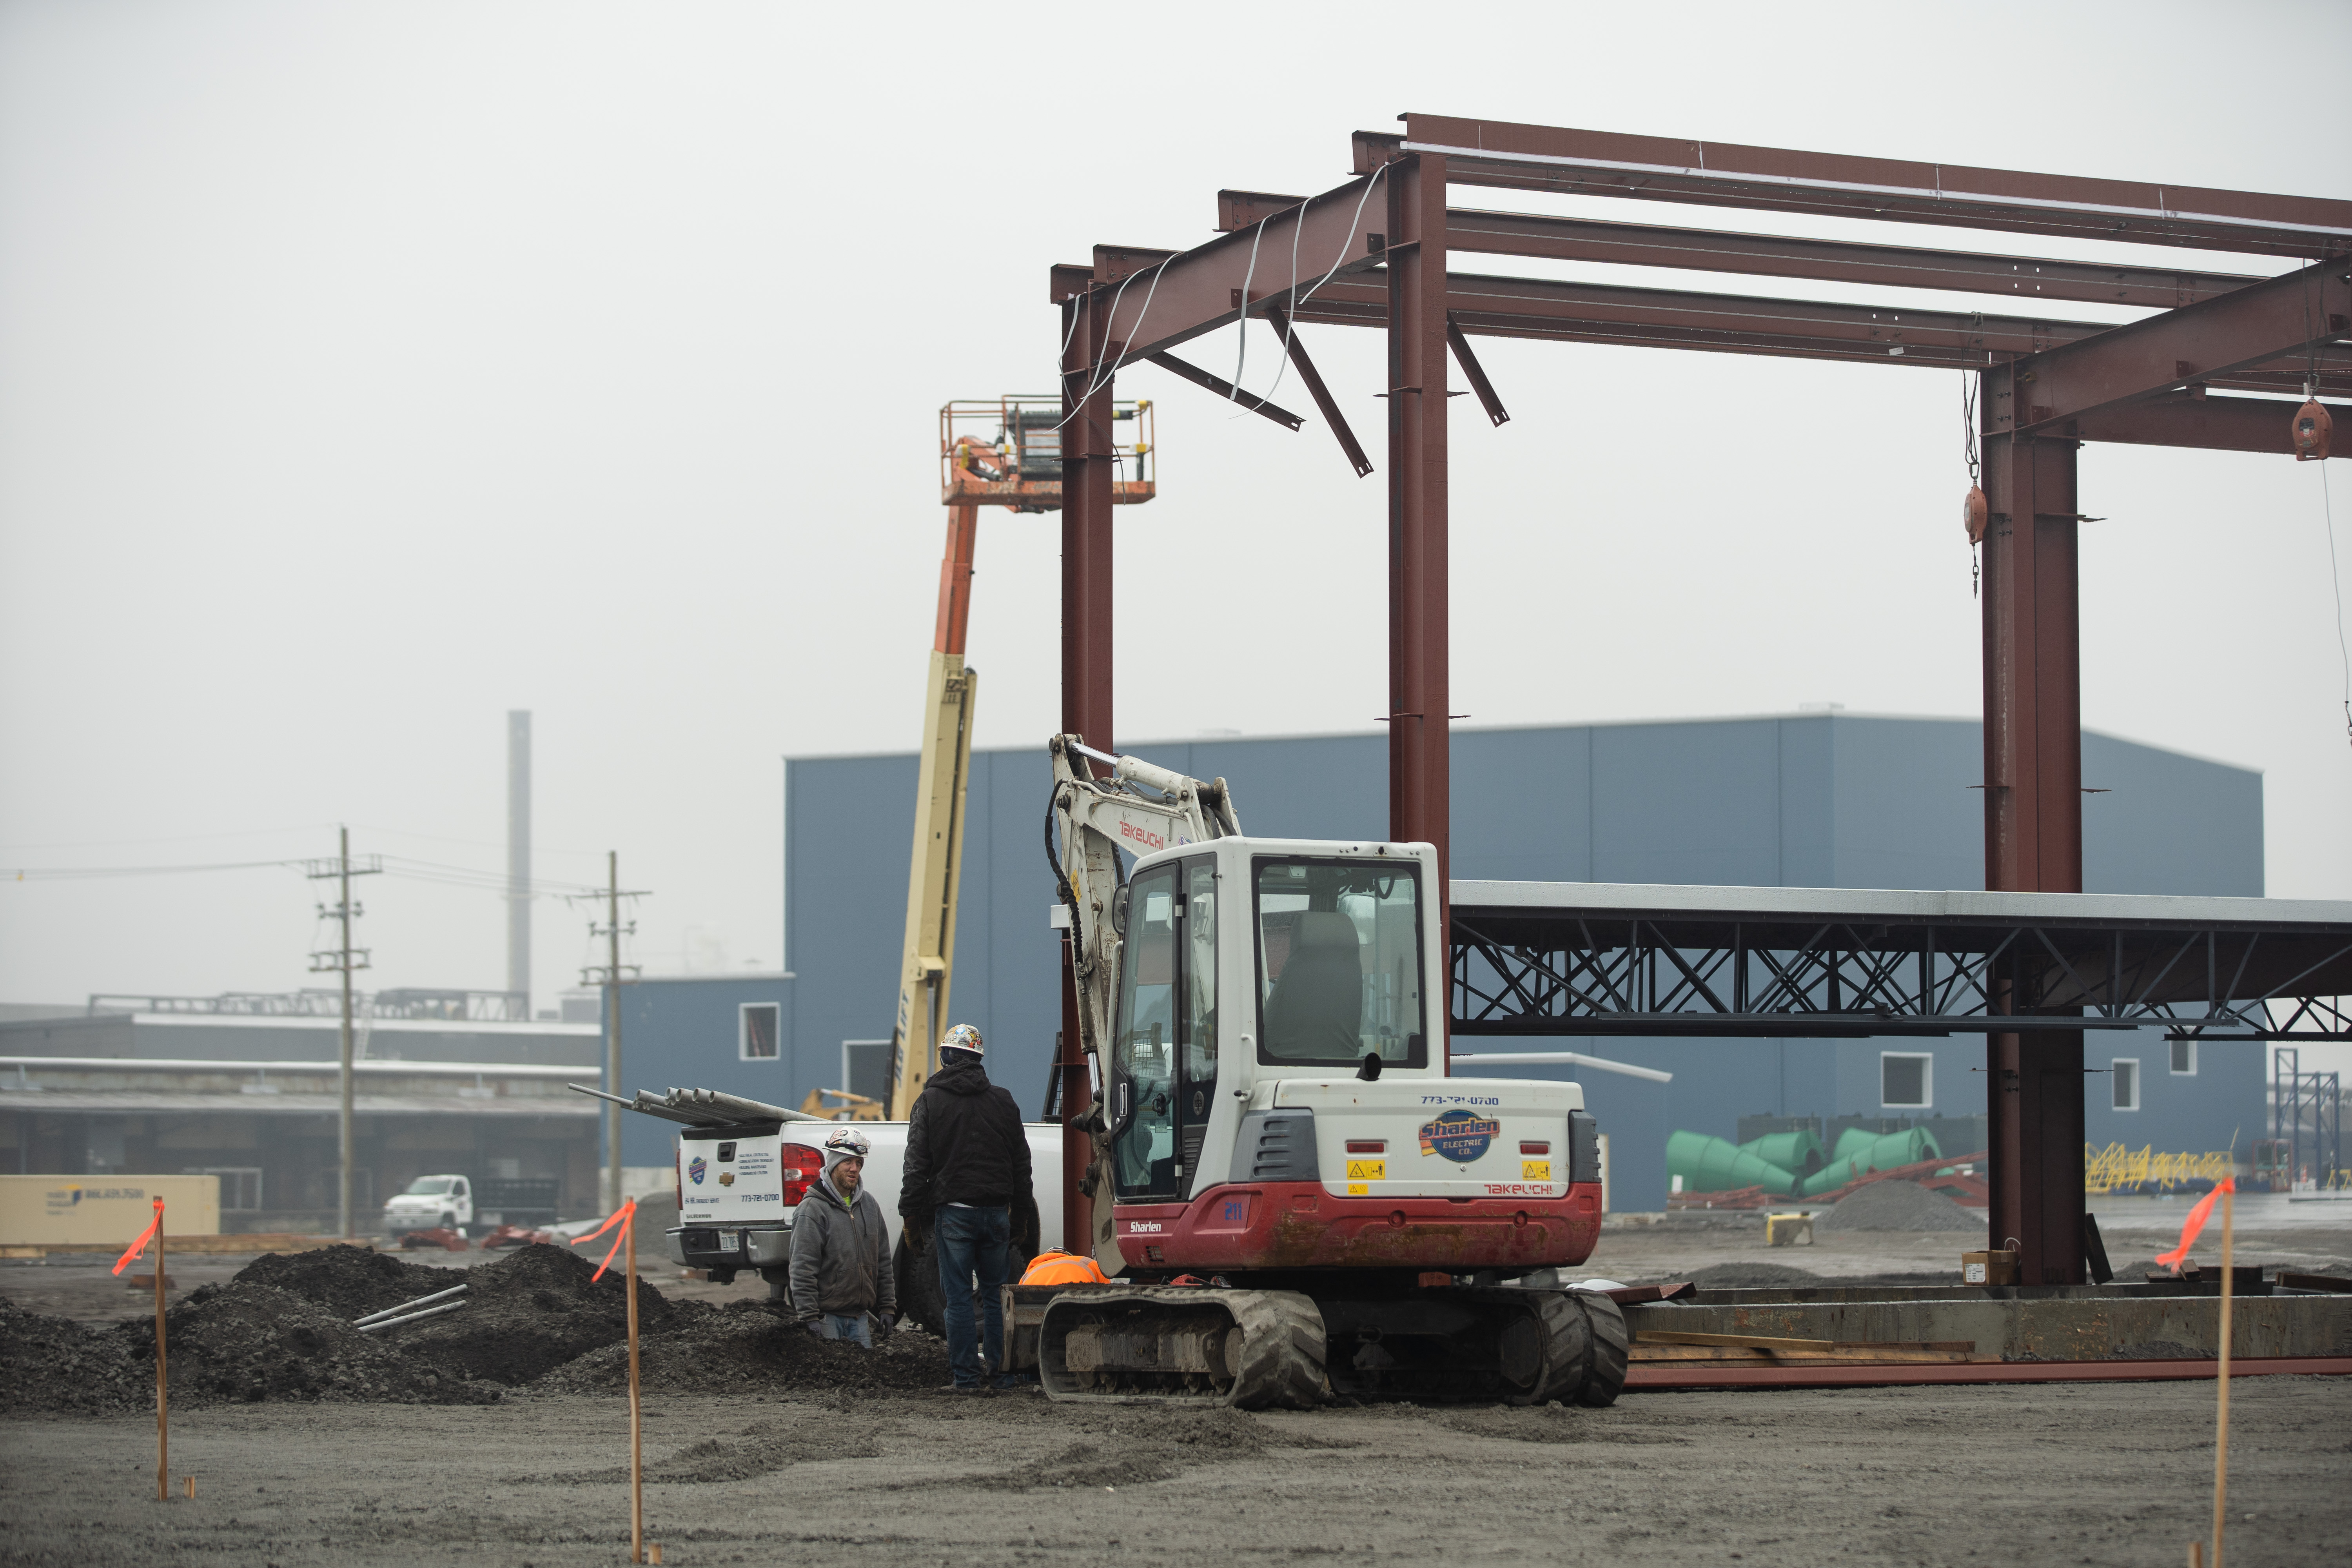 Workers build a scale house at a planned car and metal shredding facility near South Burley Avenue and East 116th Street last month. The facility is owned by RMG, which owns General Iron in Lincoln Park.